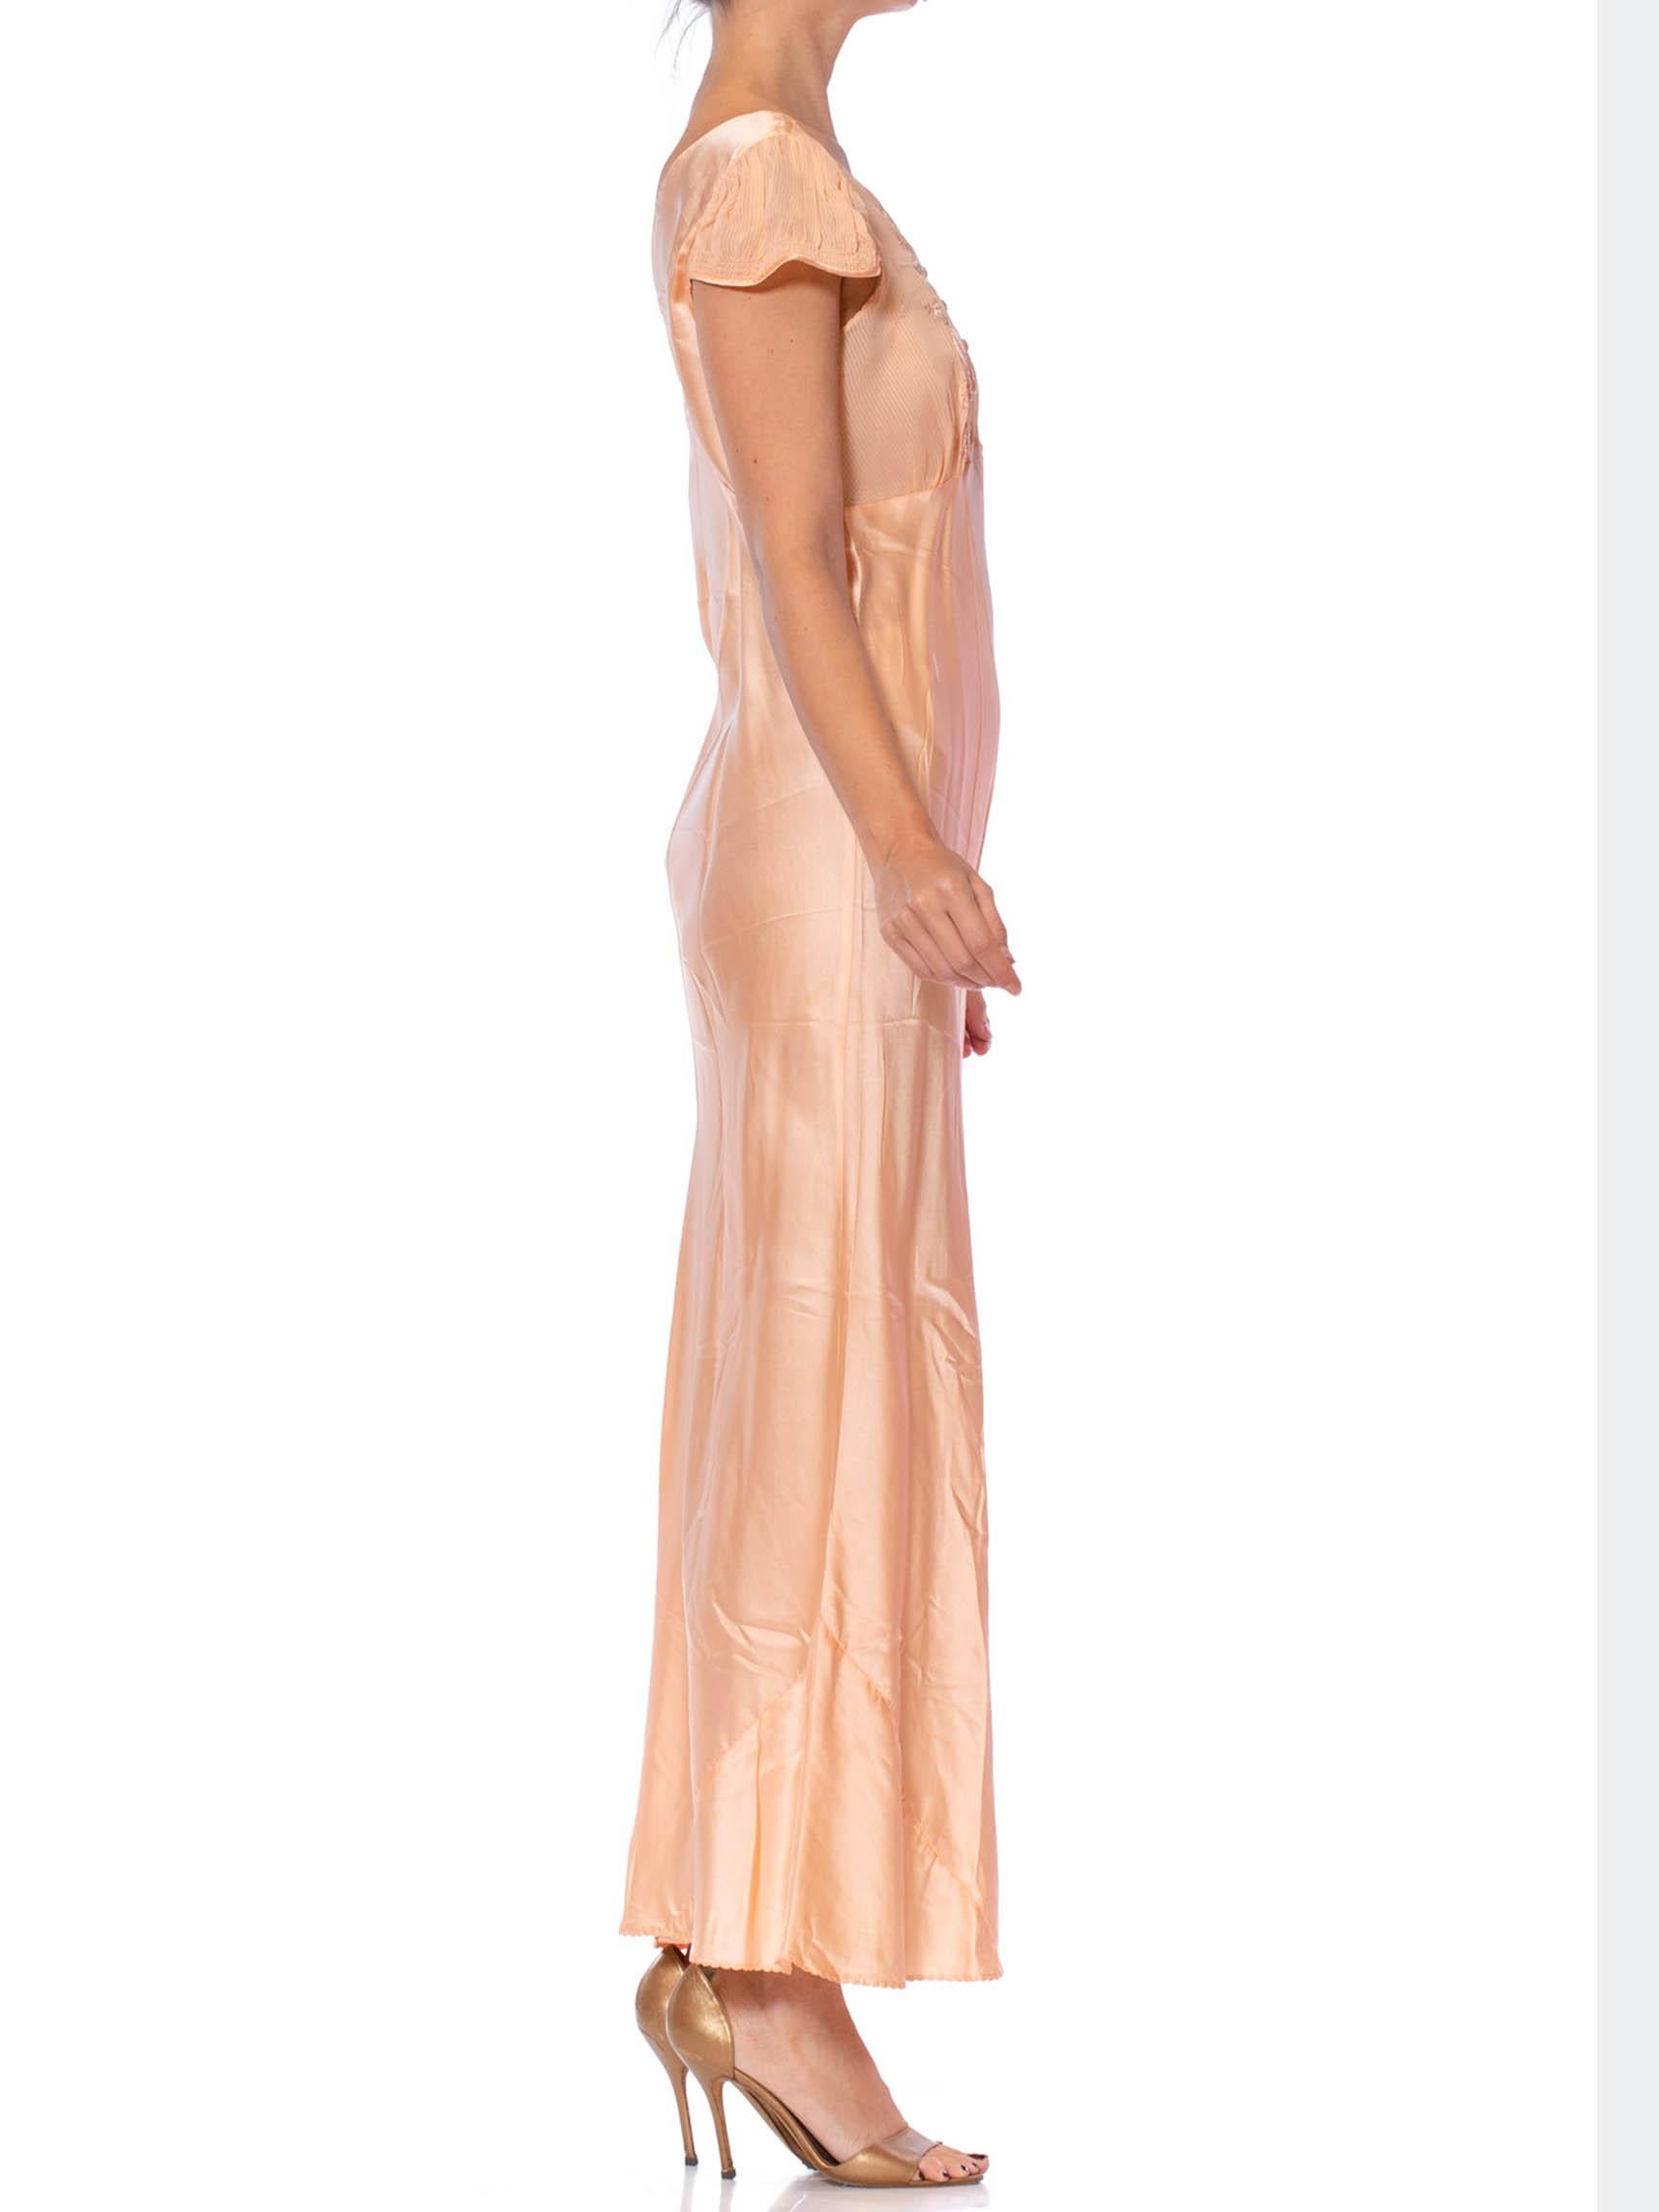 1930S Blush Pink Bias Cut Silk Charmeuse Slip DressNegligee With Sheer Embroider For Sale 3